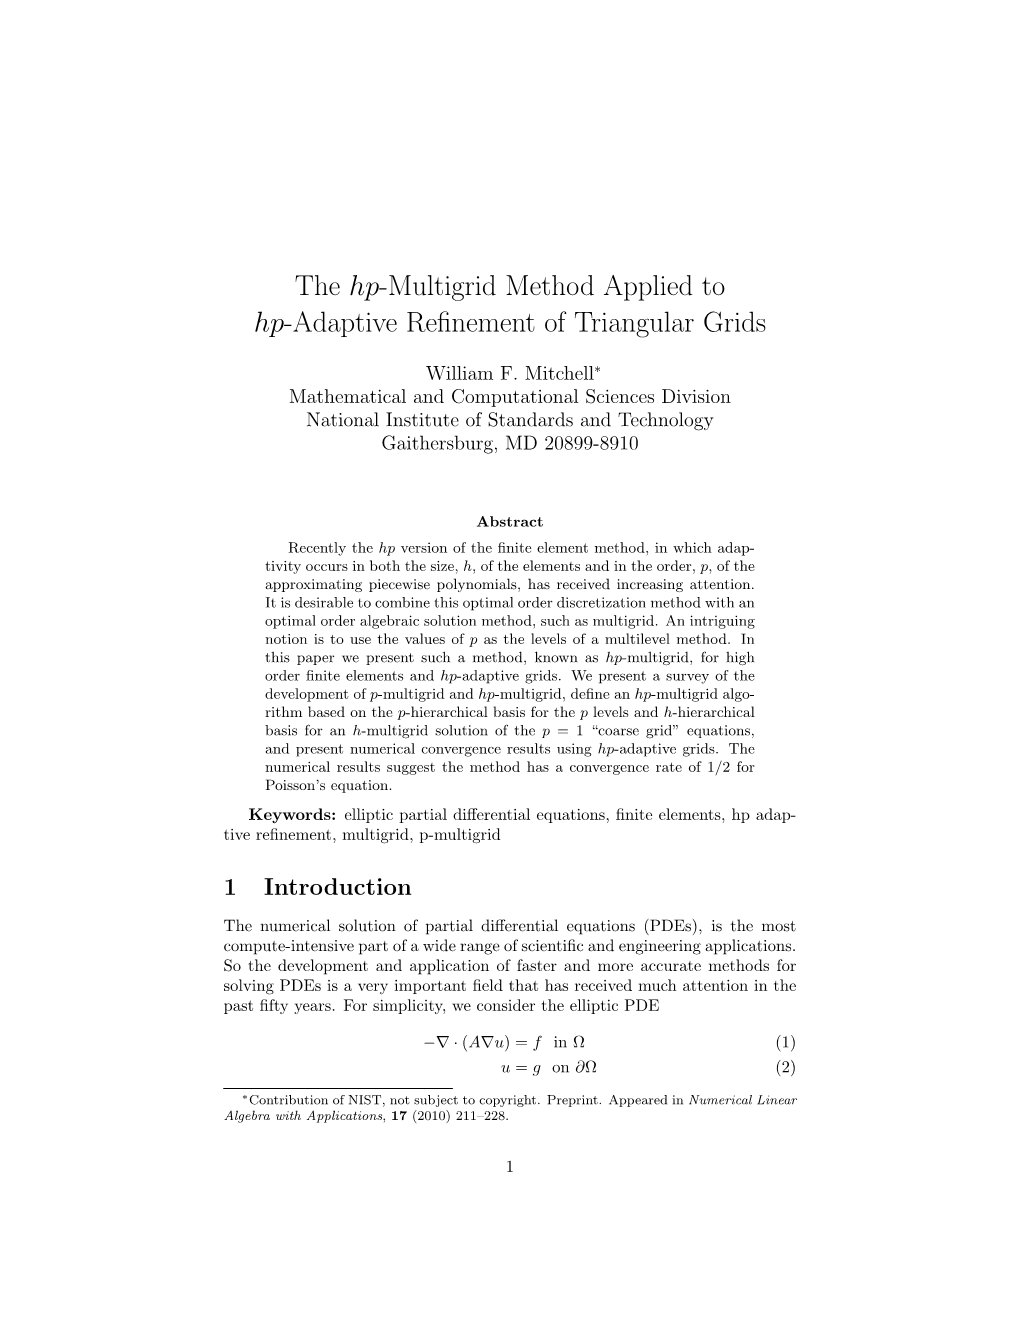 The Hp-Multigrid Method Applied to Hp-Adaptive Refinement of Triangular